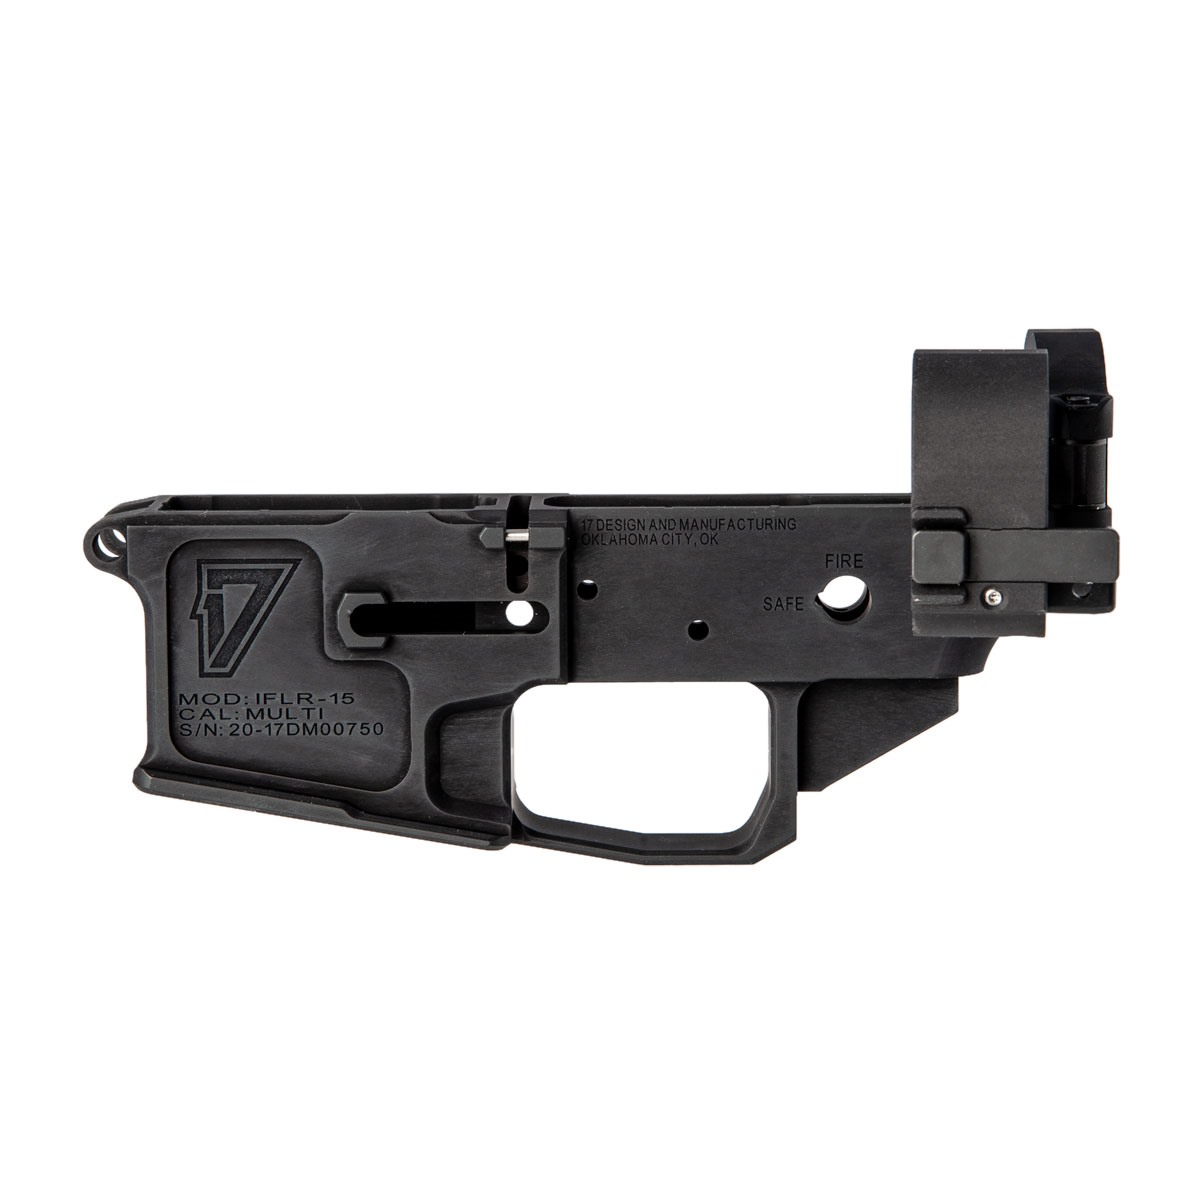 17-design-and-manufacturing-ar-15-integrated-folding-lower-receiver-brownells